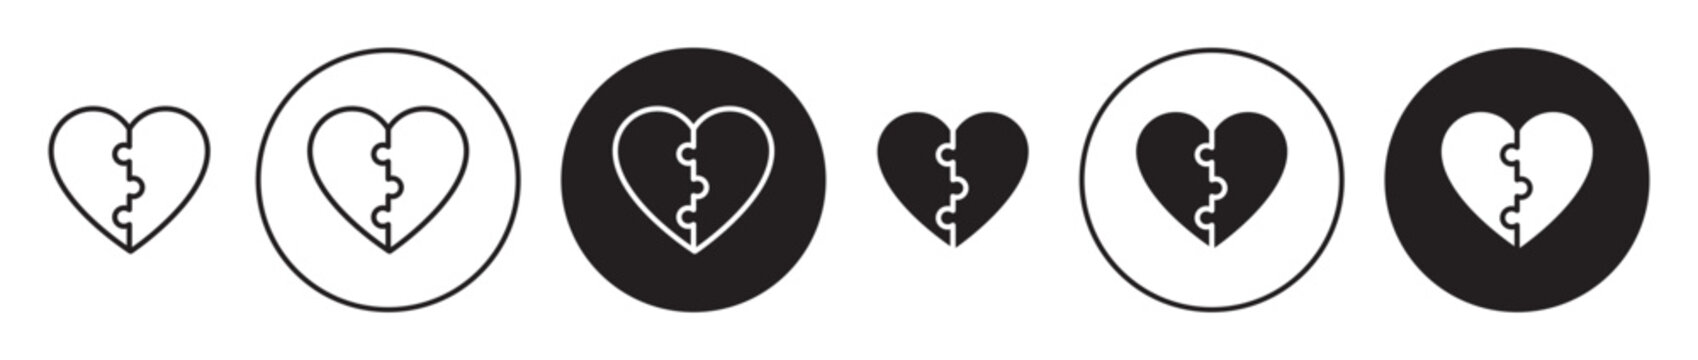 Love puzzle vector icon set. love heart matching pieces symbol in black color.